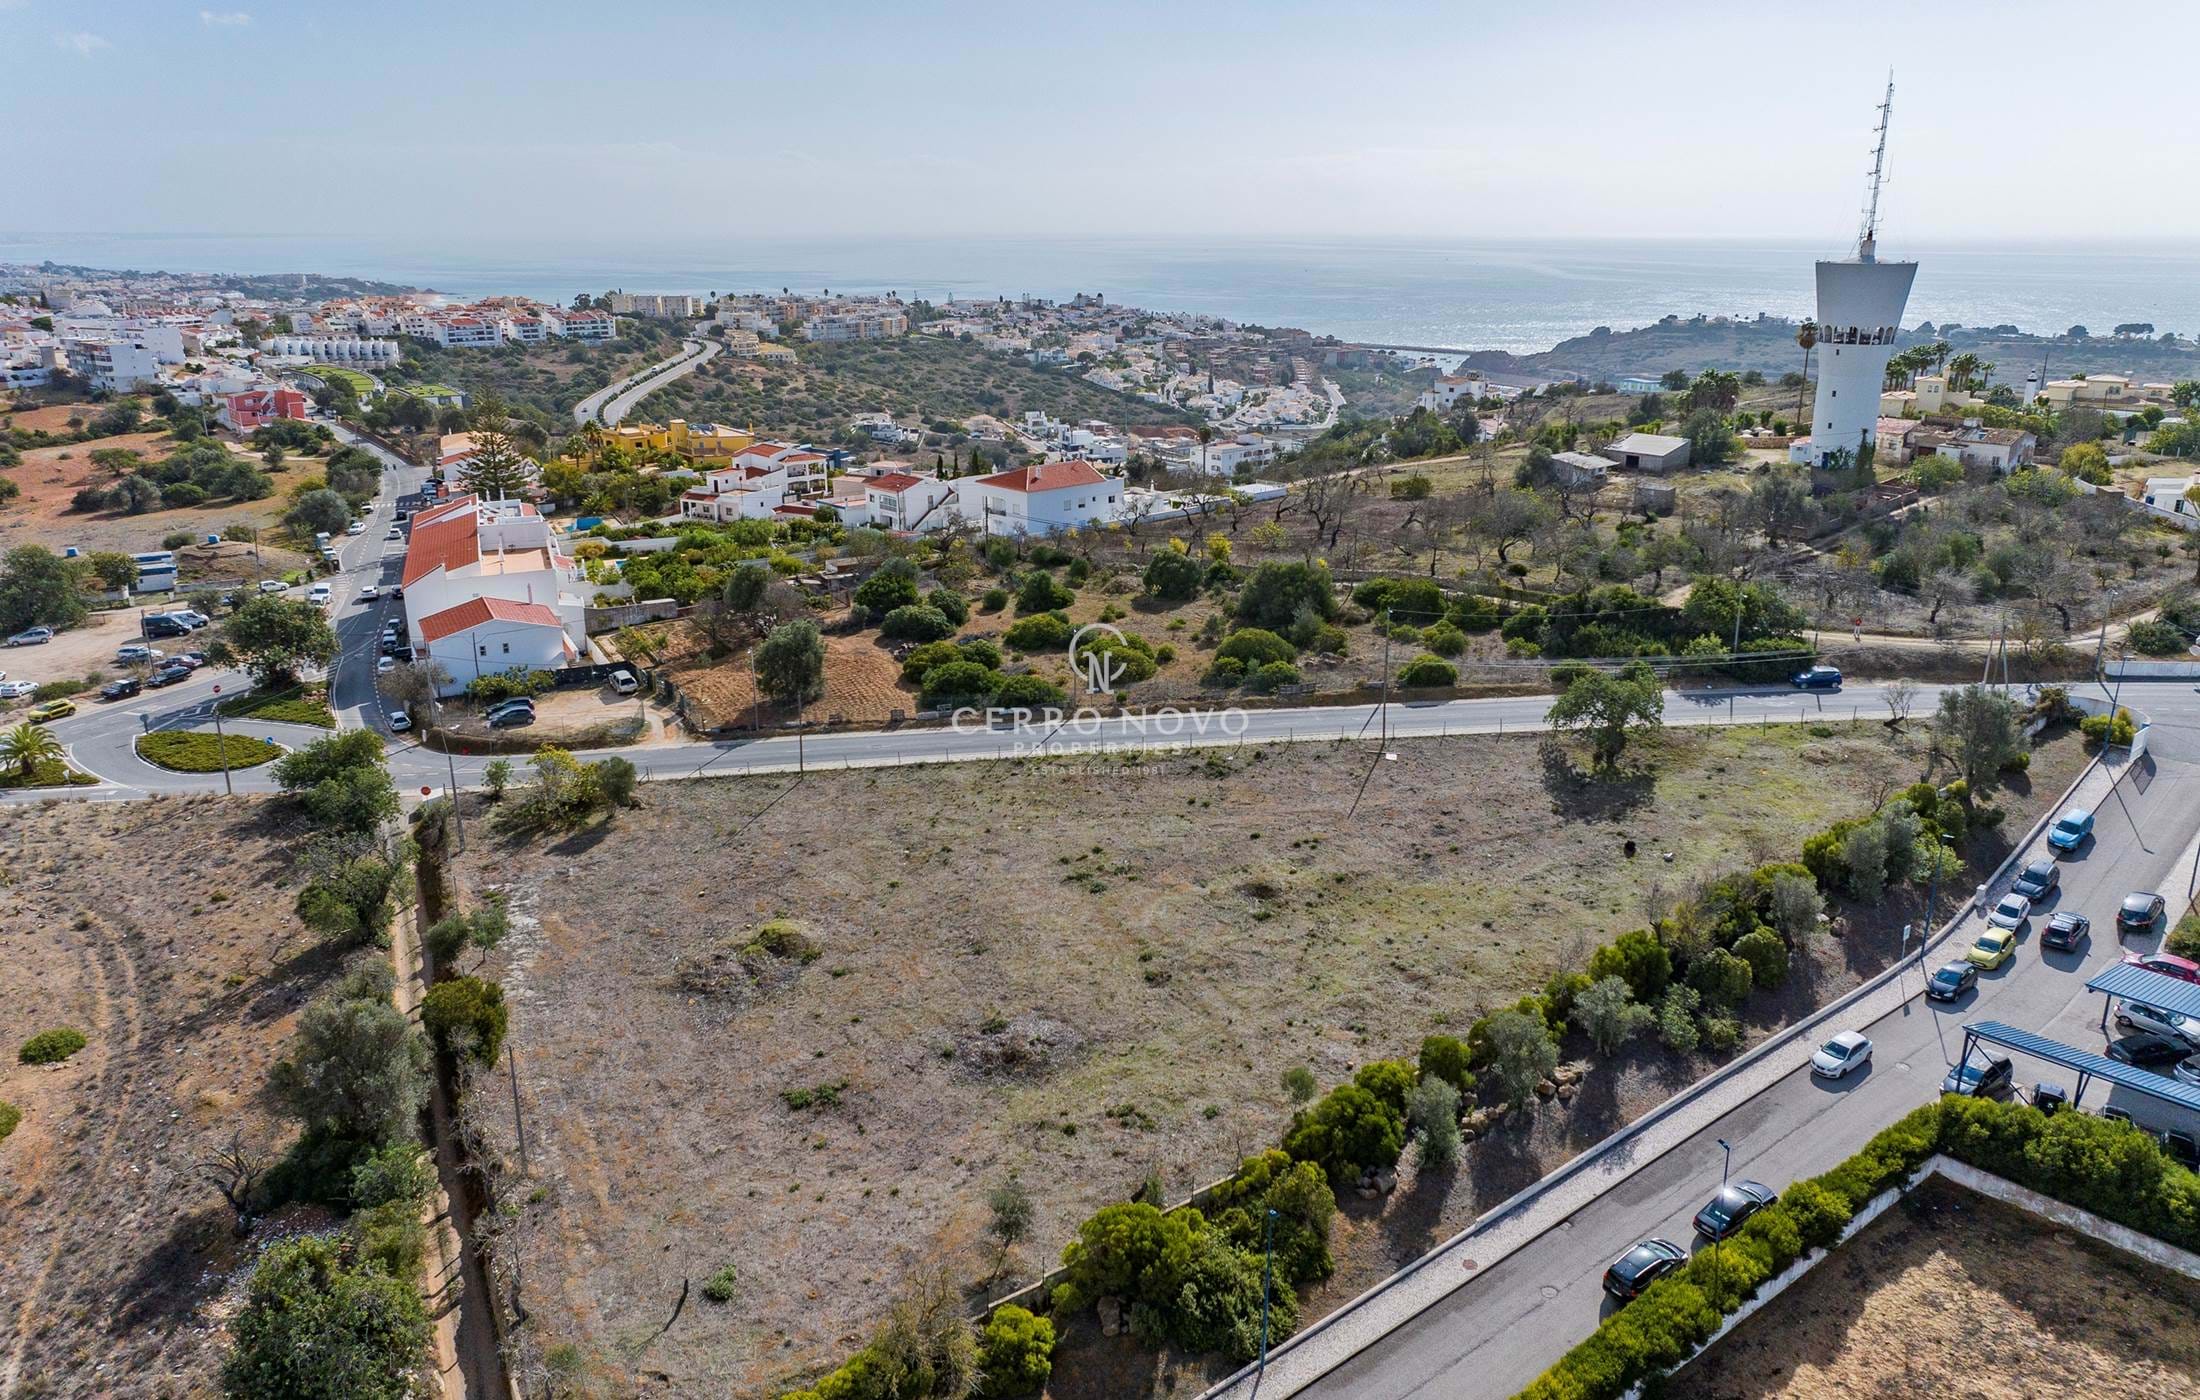 A Central Commercial Development Opportunity for Motorhomes in Albufeira